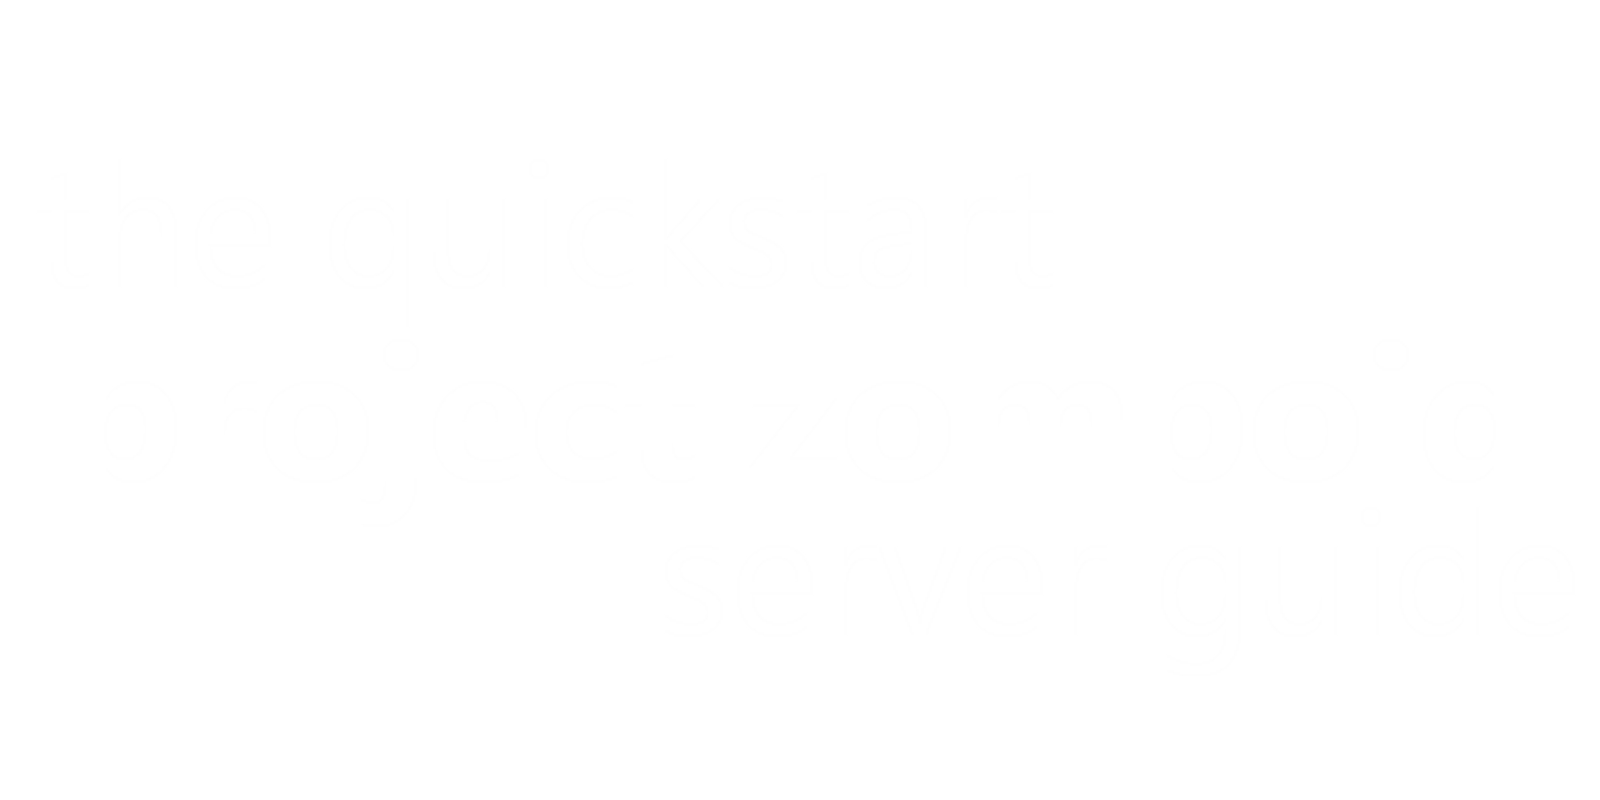 The Quickstart Project Zomboid Server Guide